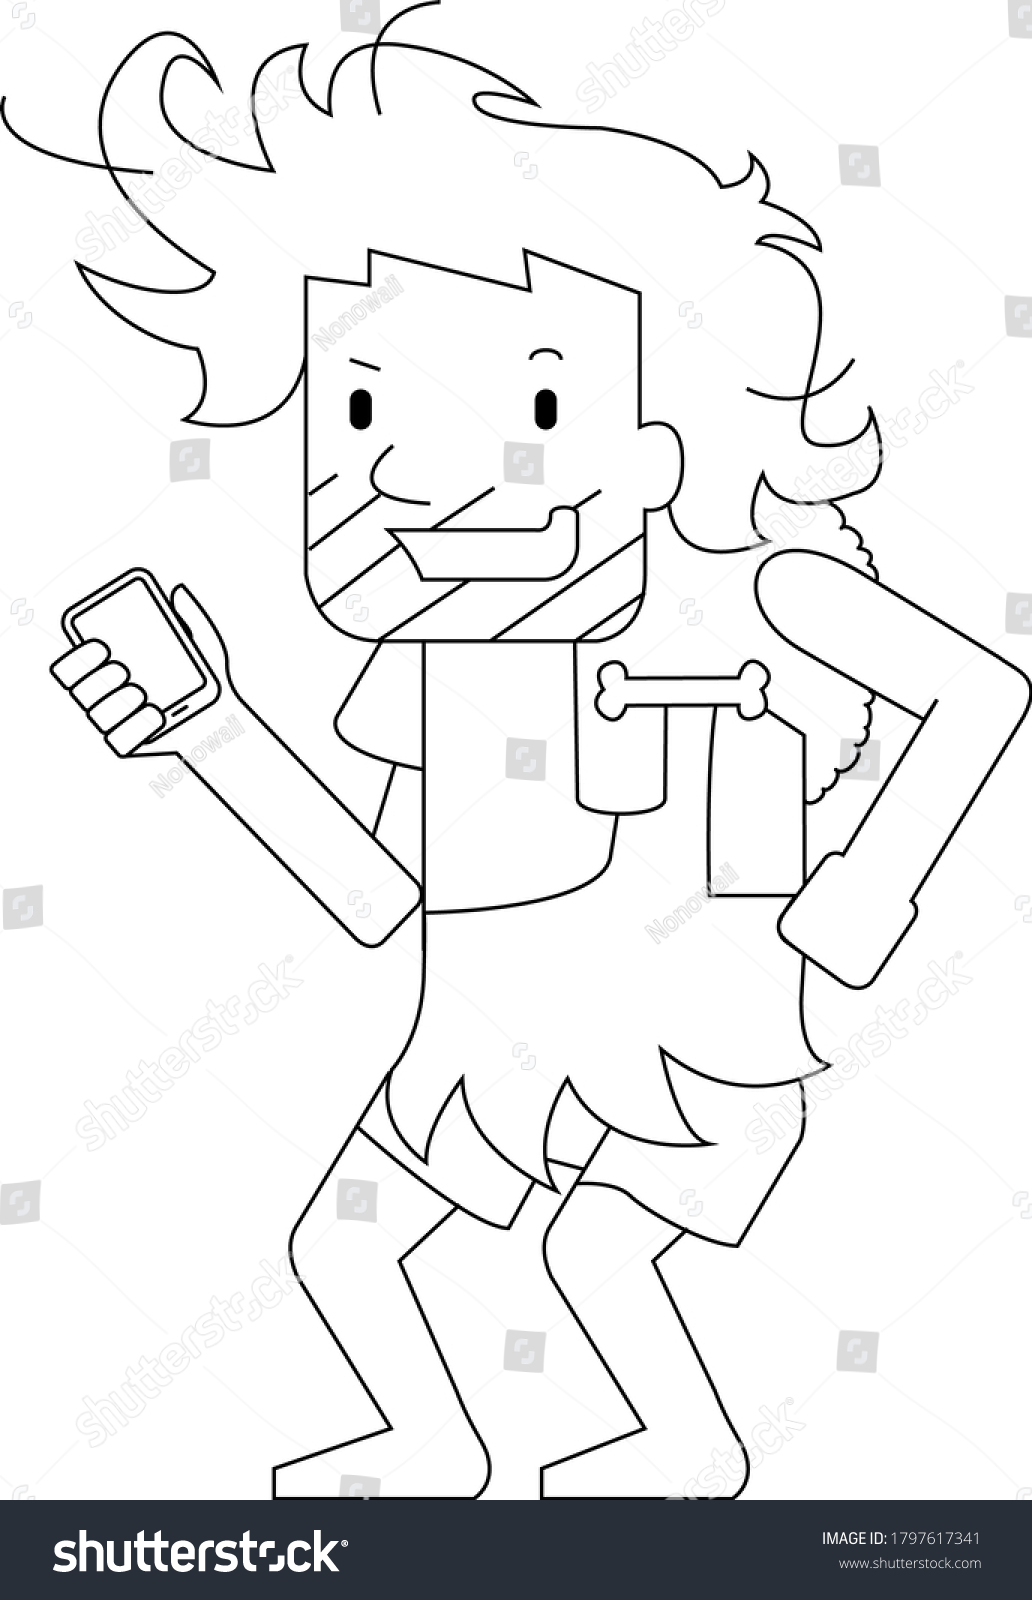 SVG of Cro-magnon character begin with a smartphone svg